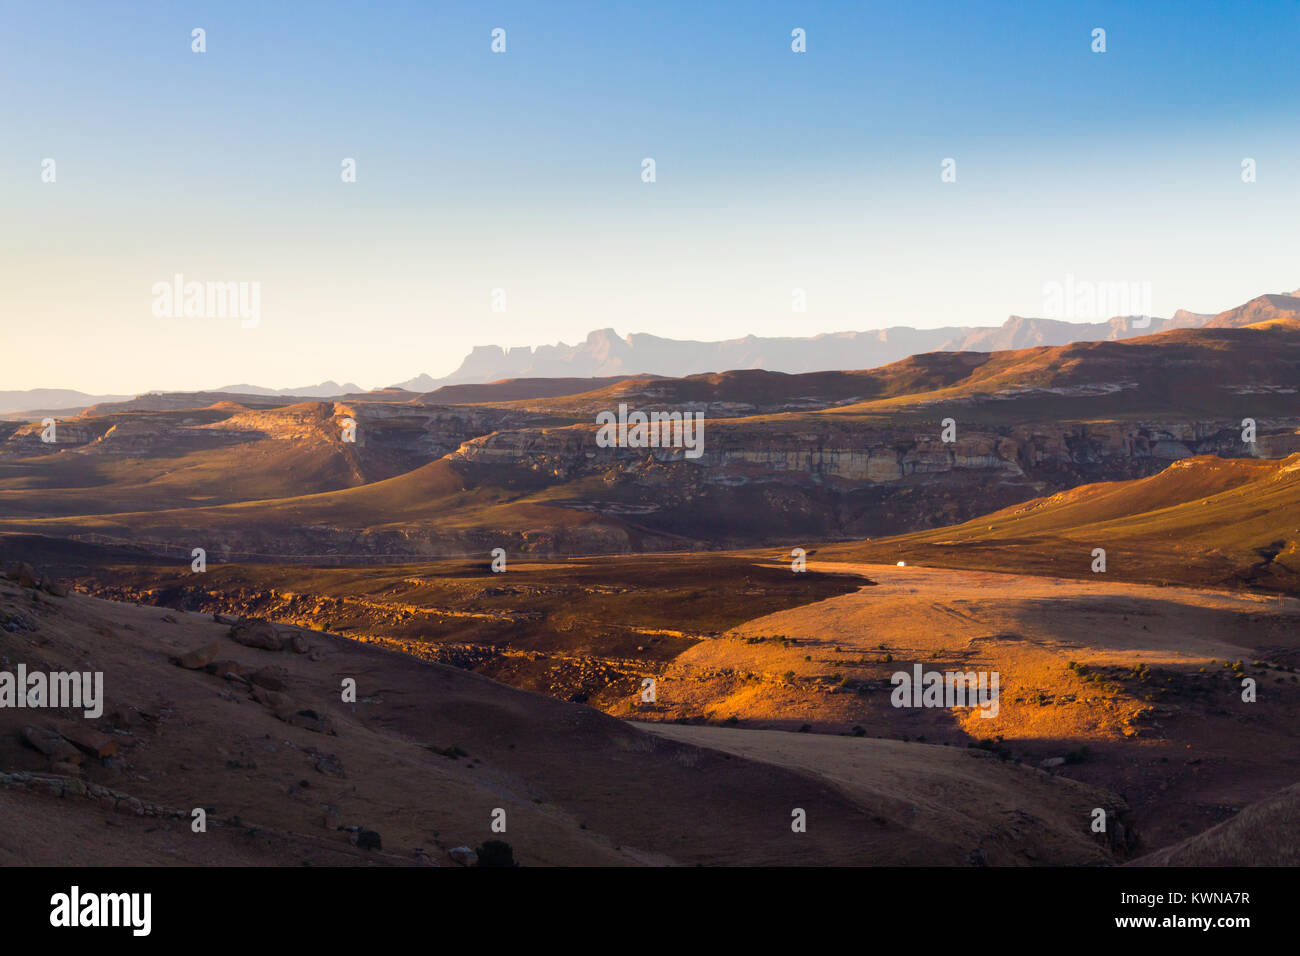 Golden Gate Highlands National Park panorama, South Africa. African landscape Stock Photo